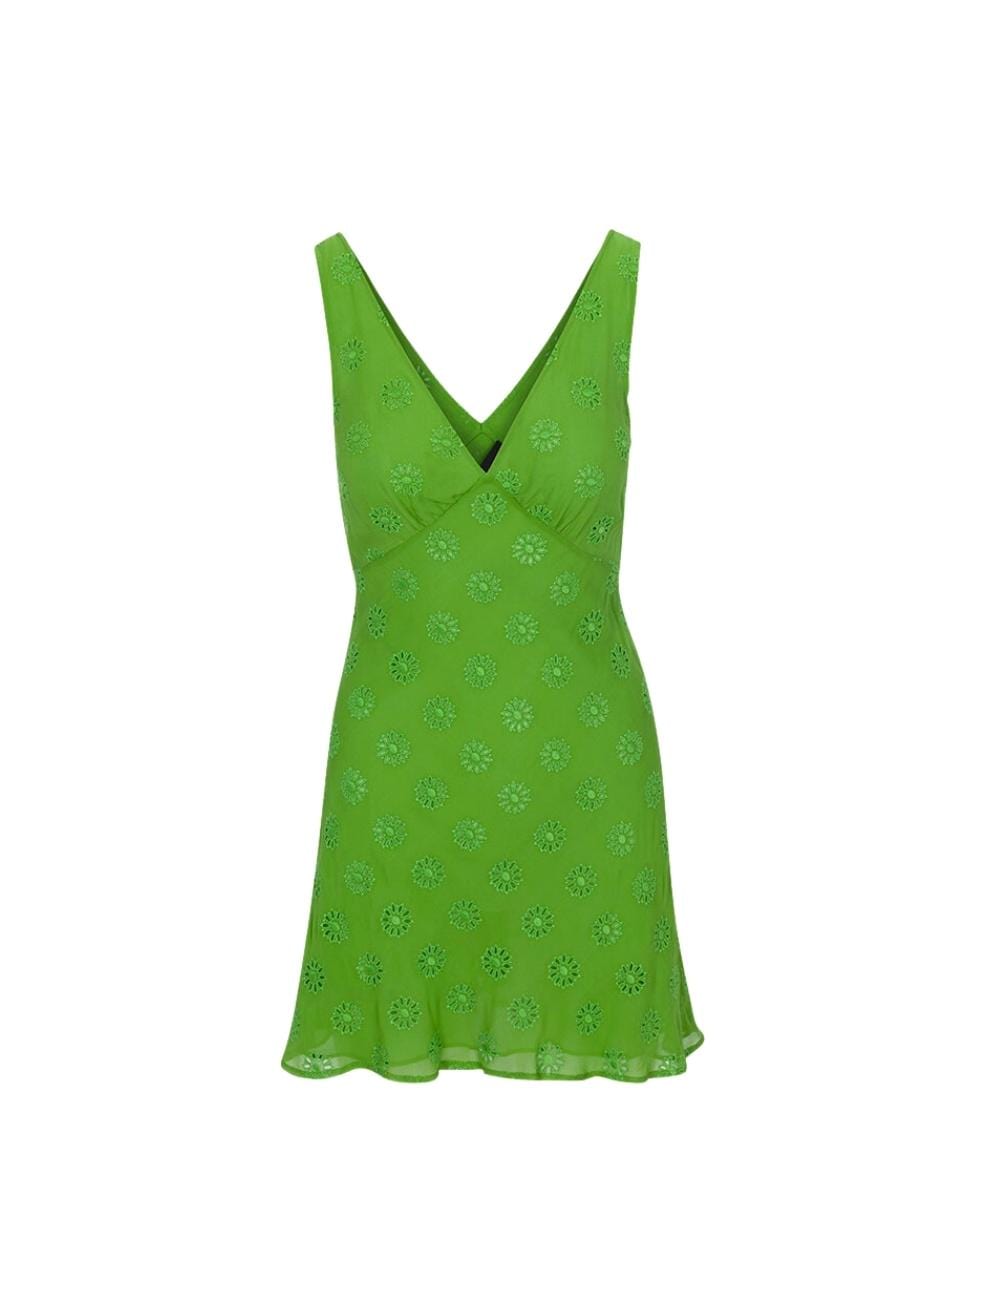 THE LOURDES in Moss Broderie